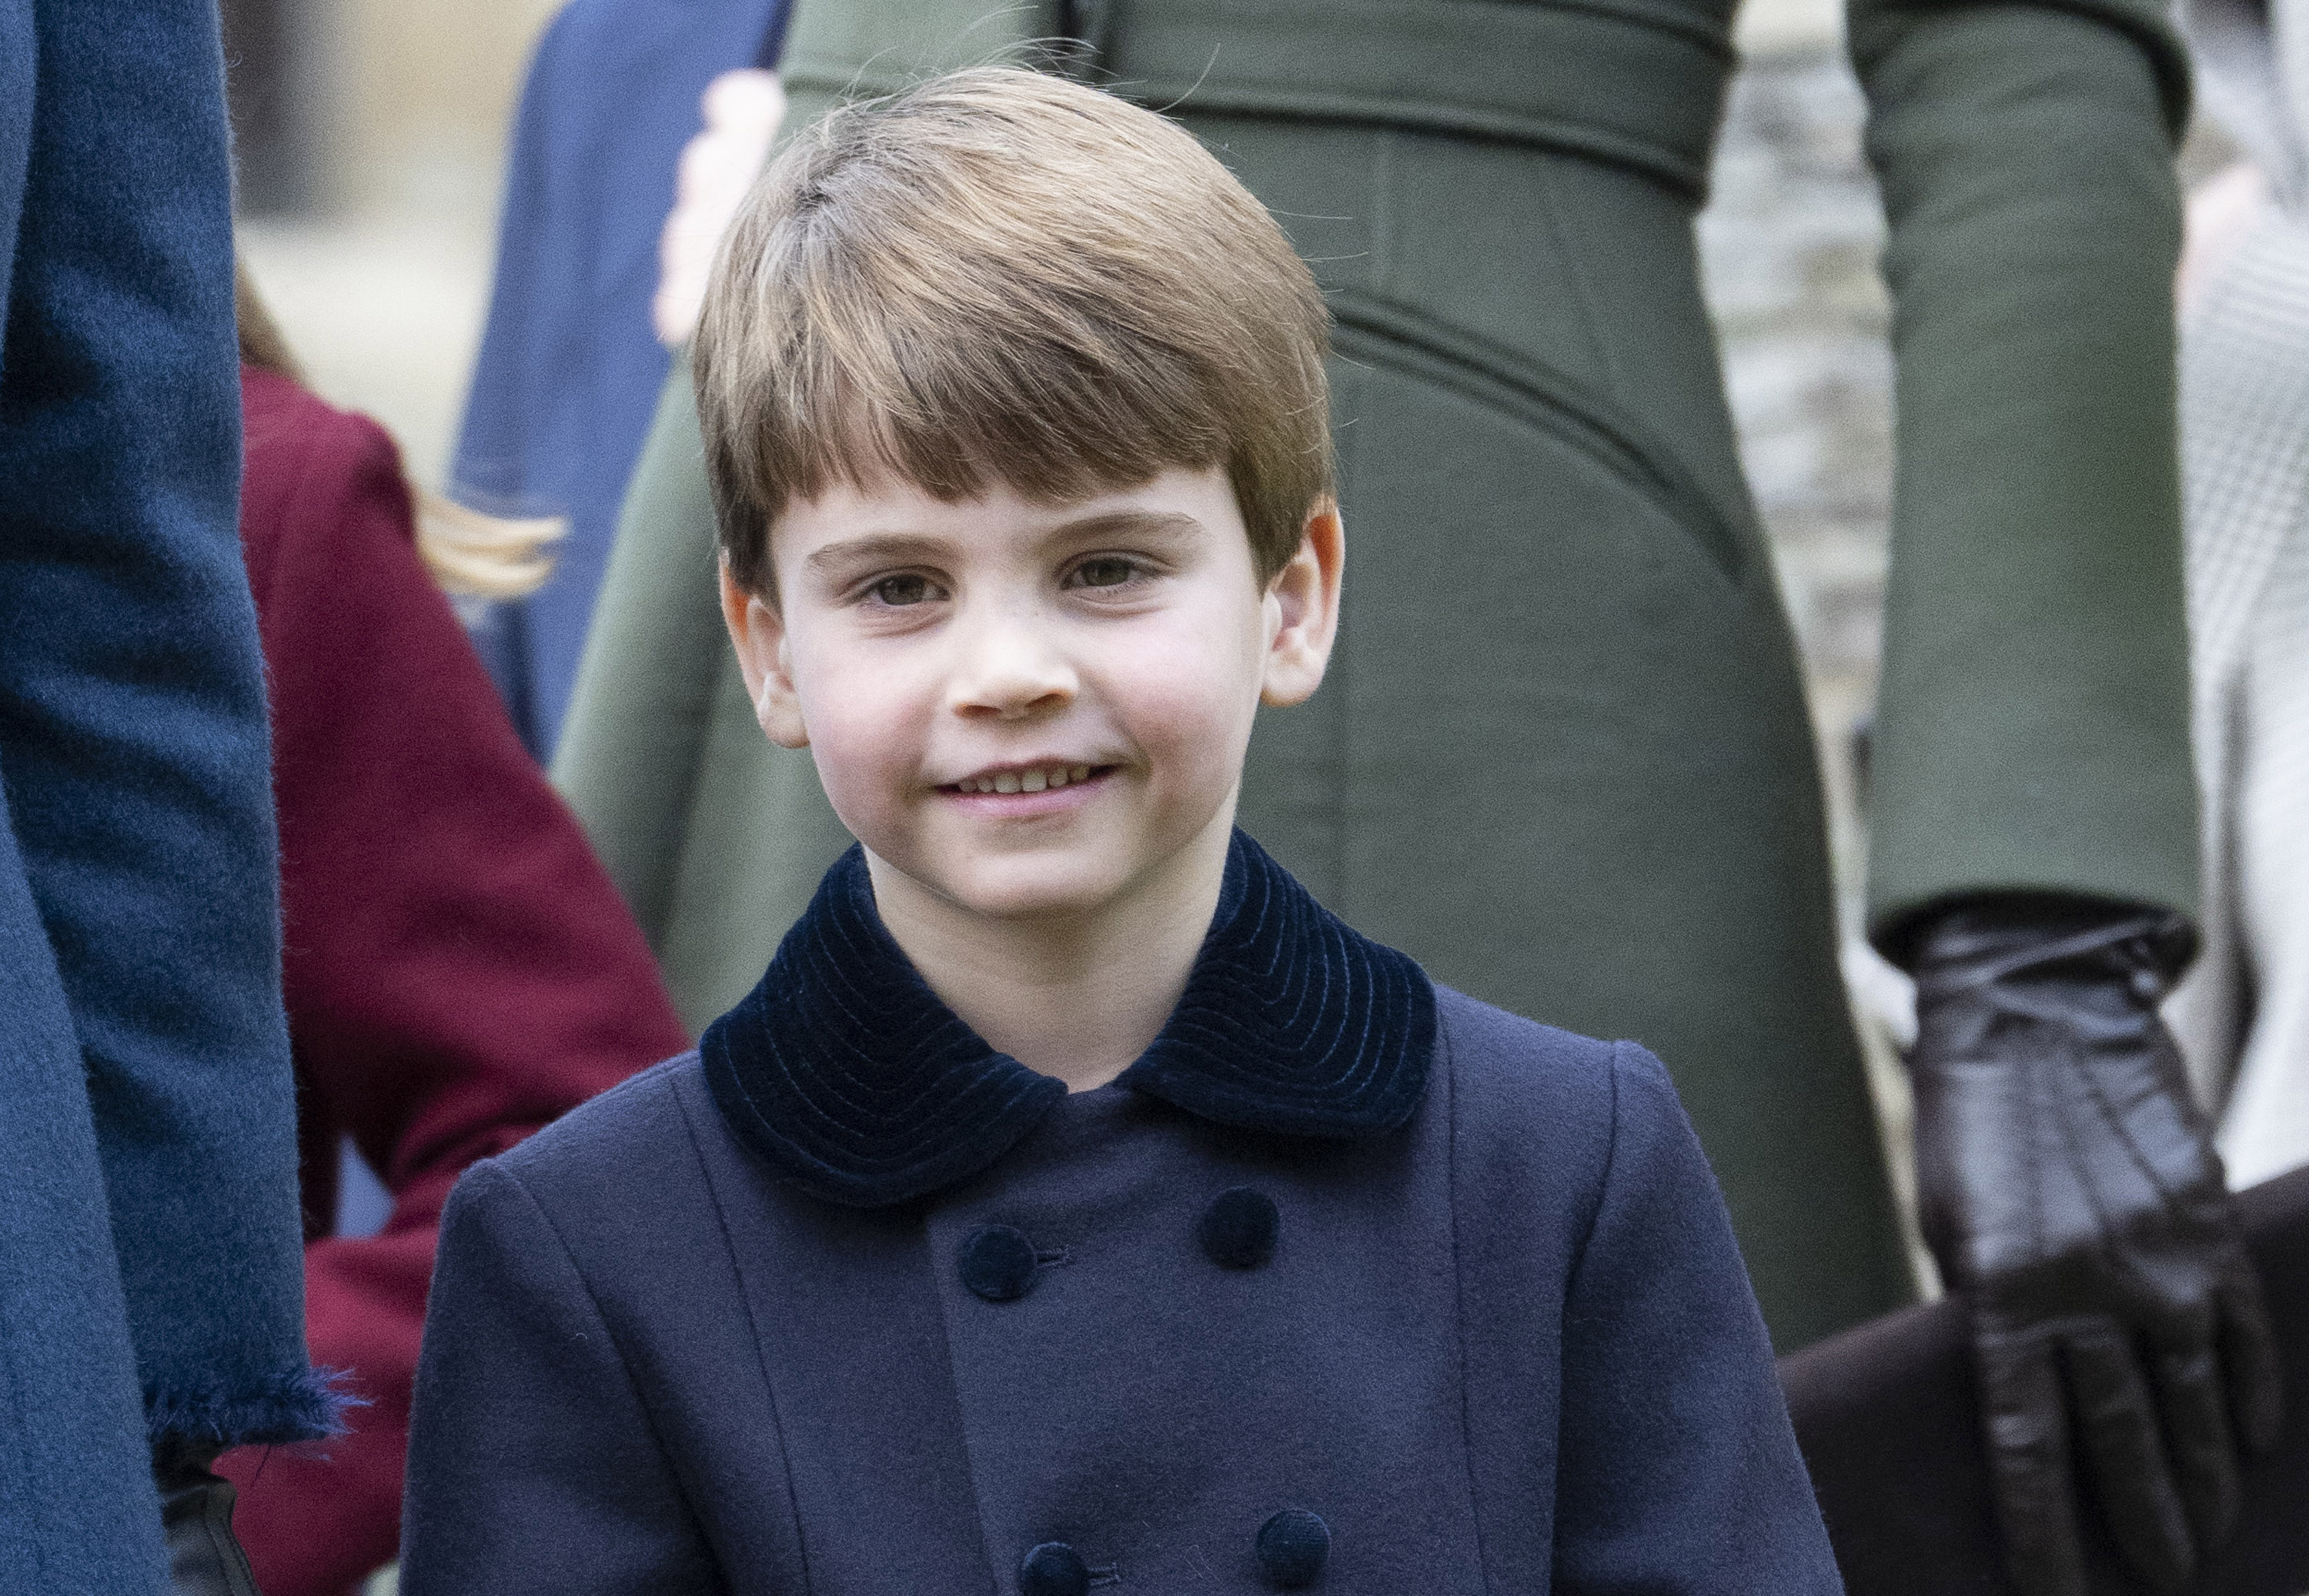 <p>For the first time ever, Prince Louis joined his parents and siblings for the Christmas services at St. Mary Magdalene Church at King Charles III's Sandringham estate in Norfolk, England, on Dec. 25, 2022.</p>